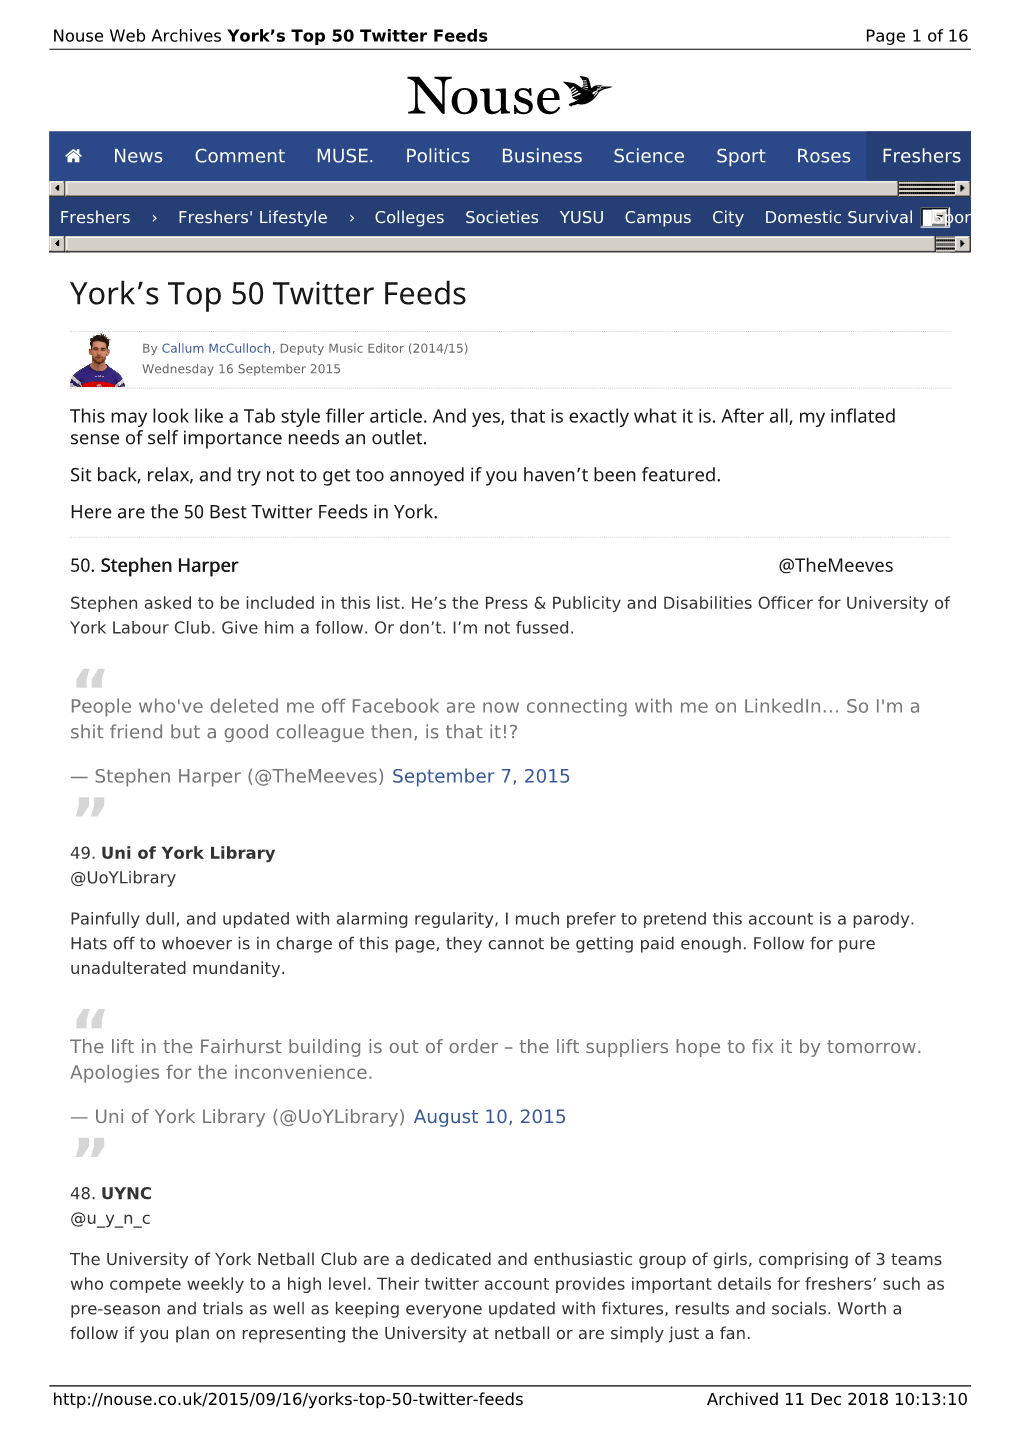 York's Top 50 Twitter Feeds | Nouse